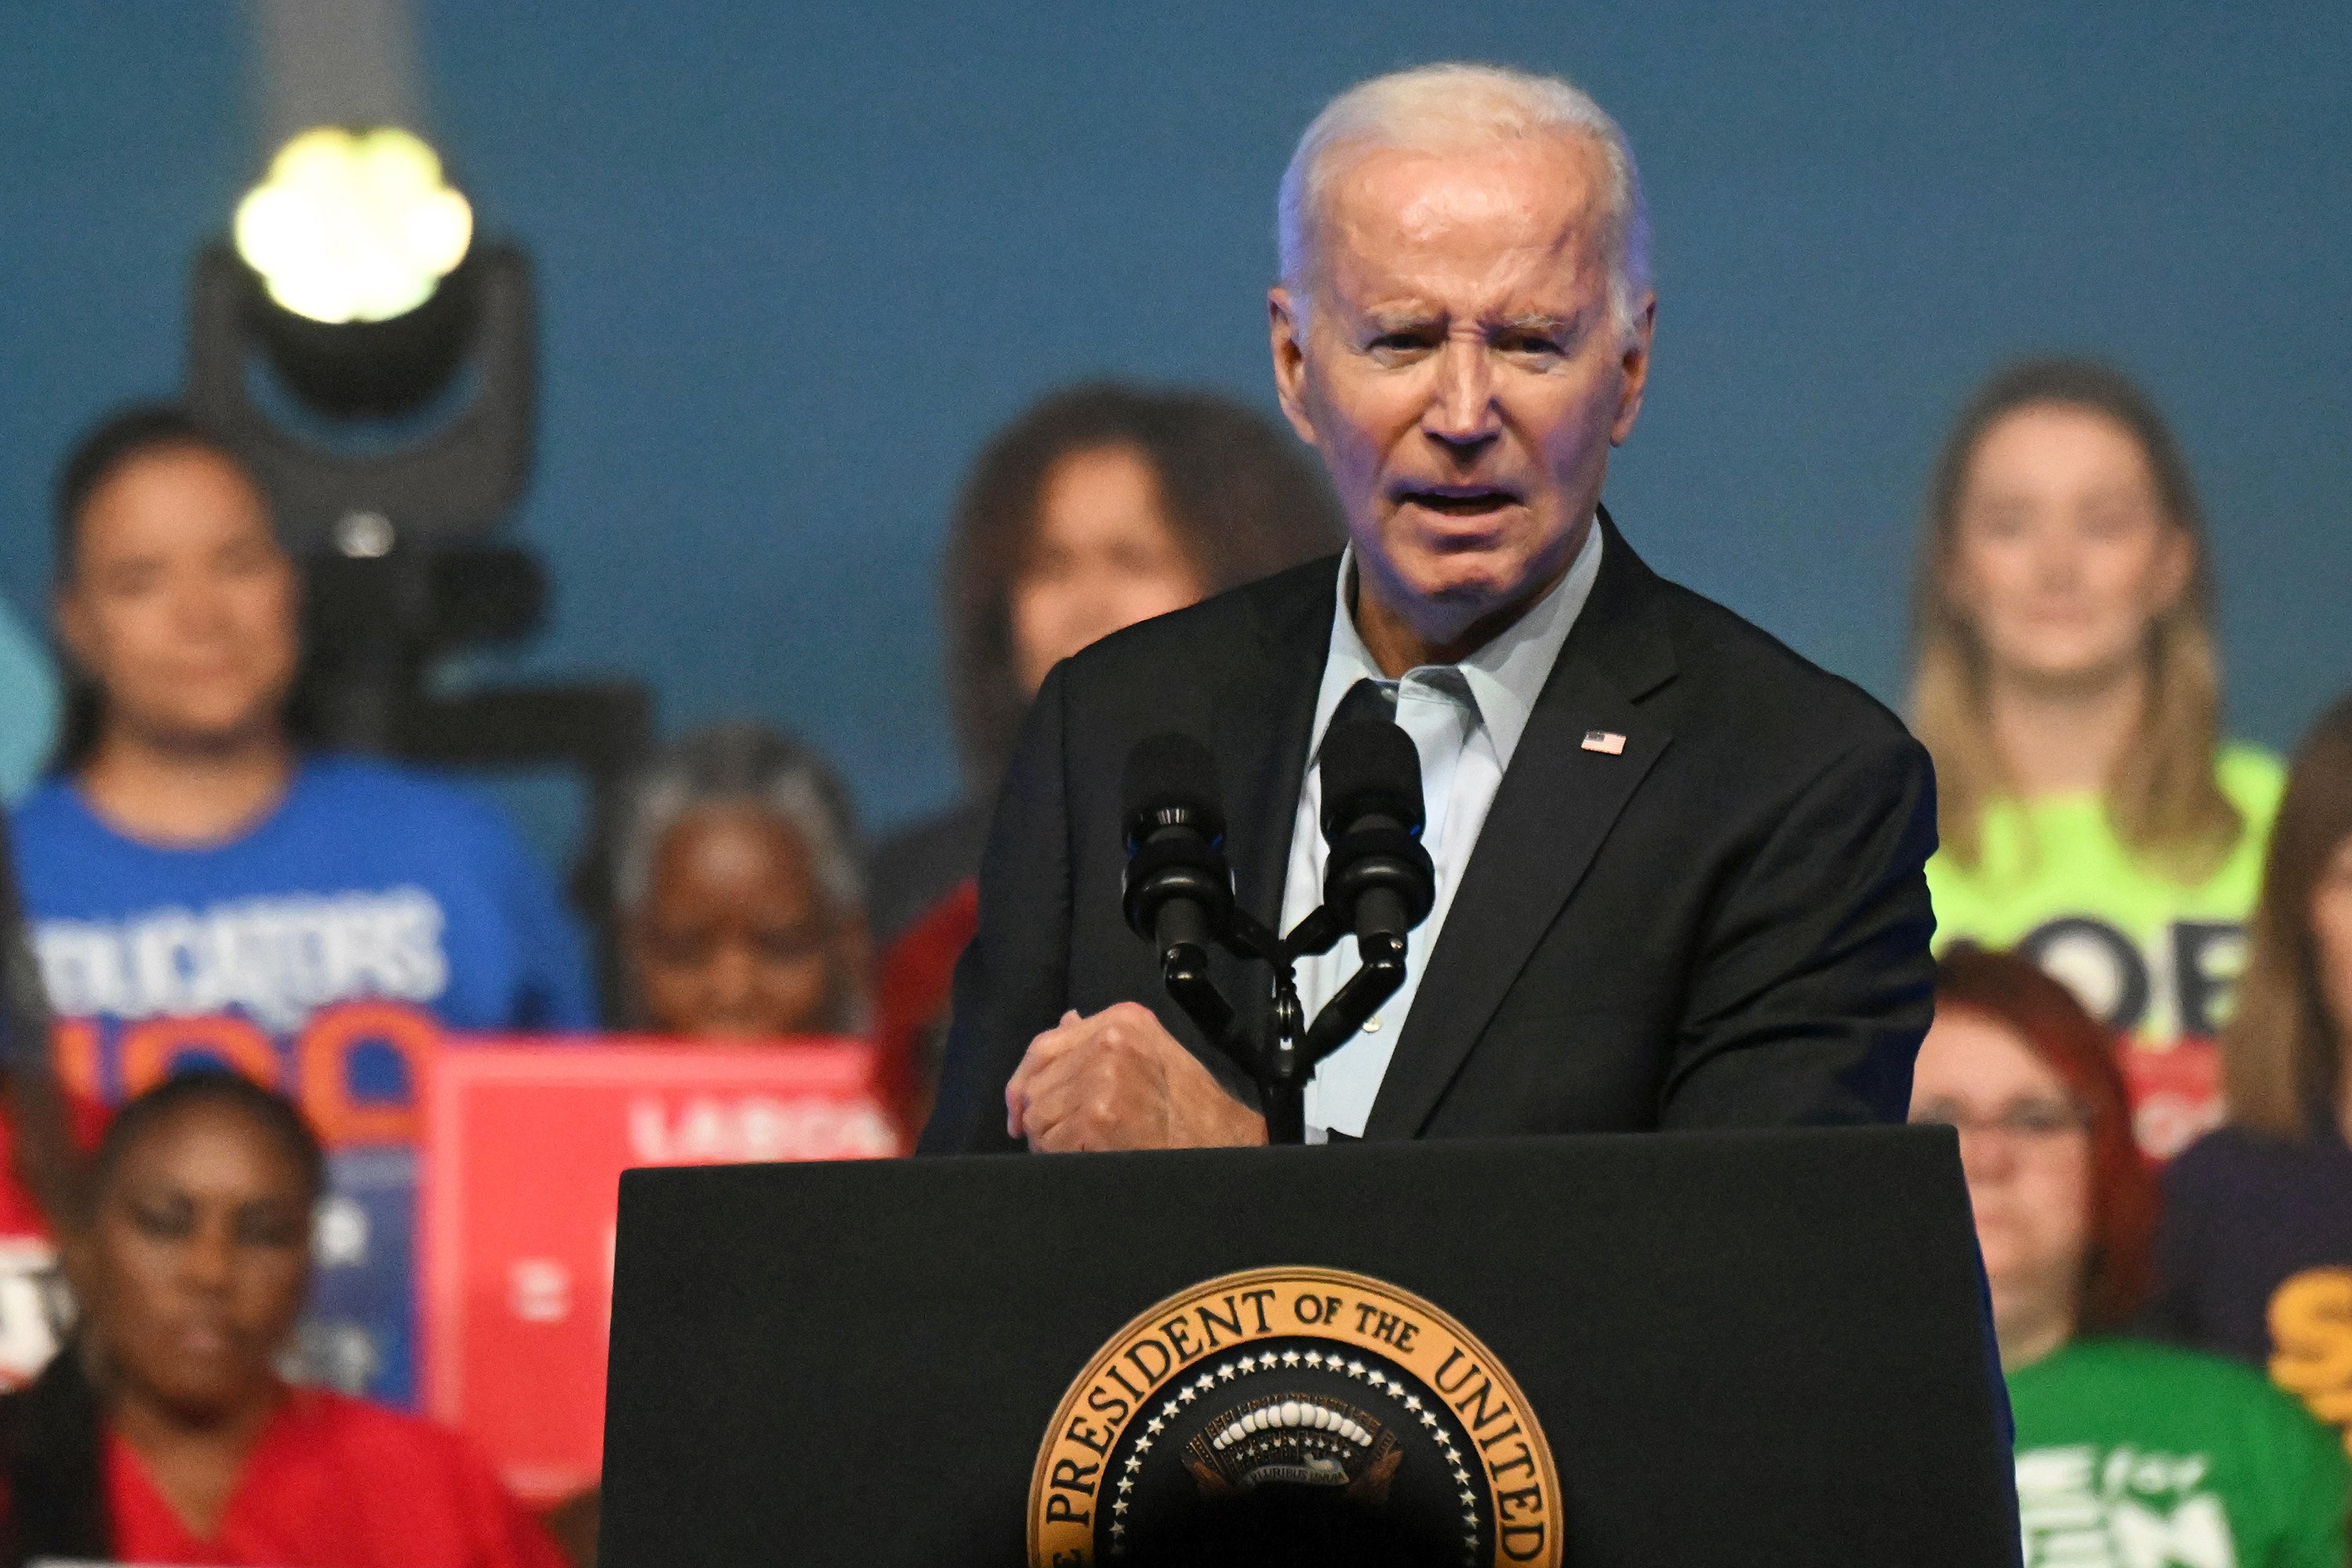 US President Joe Biden addresses union workers during a campaign rally in Philadelphia on Saturday. Photo: Getty Images / TNS